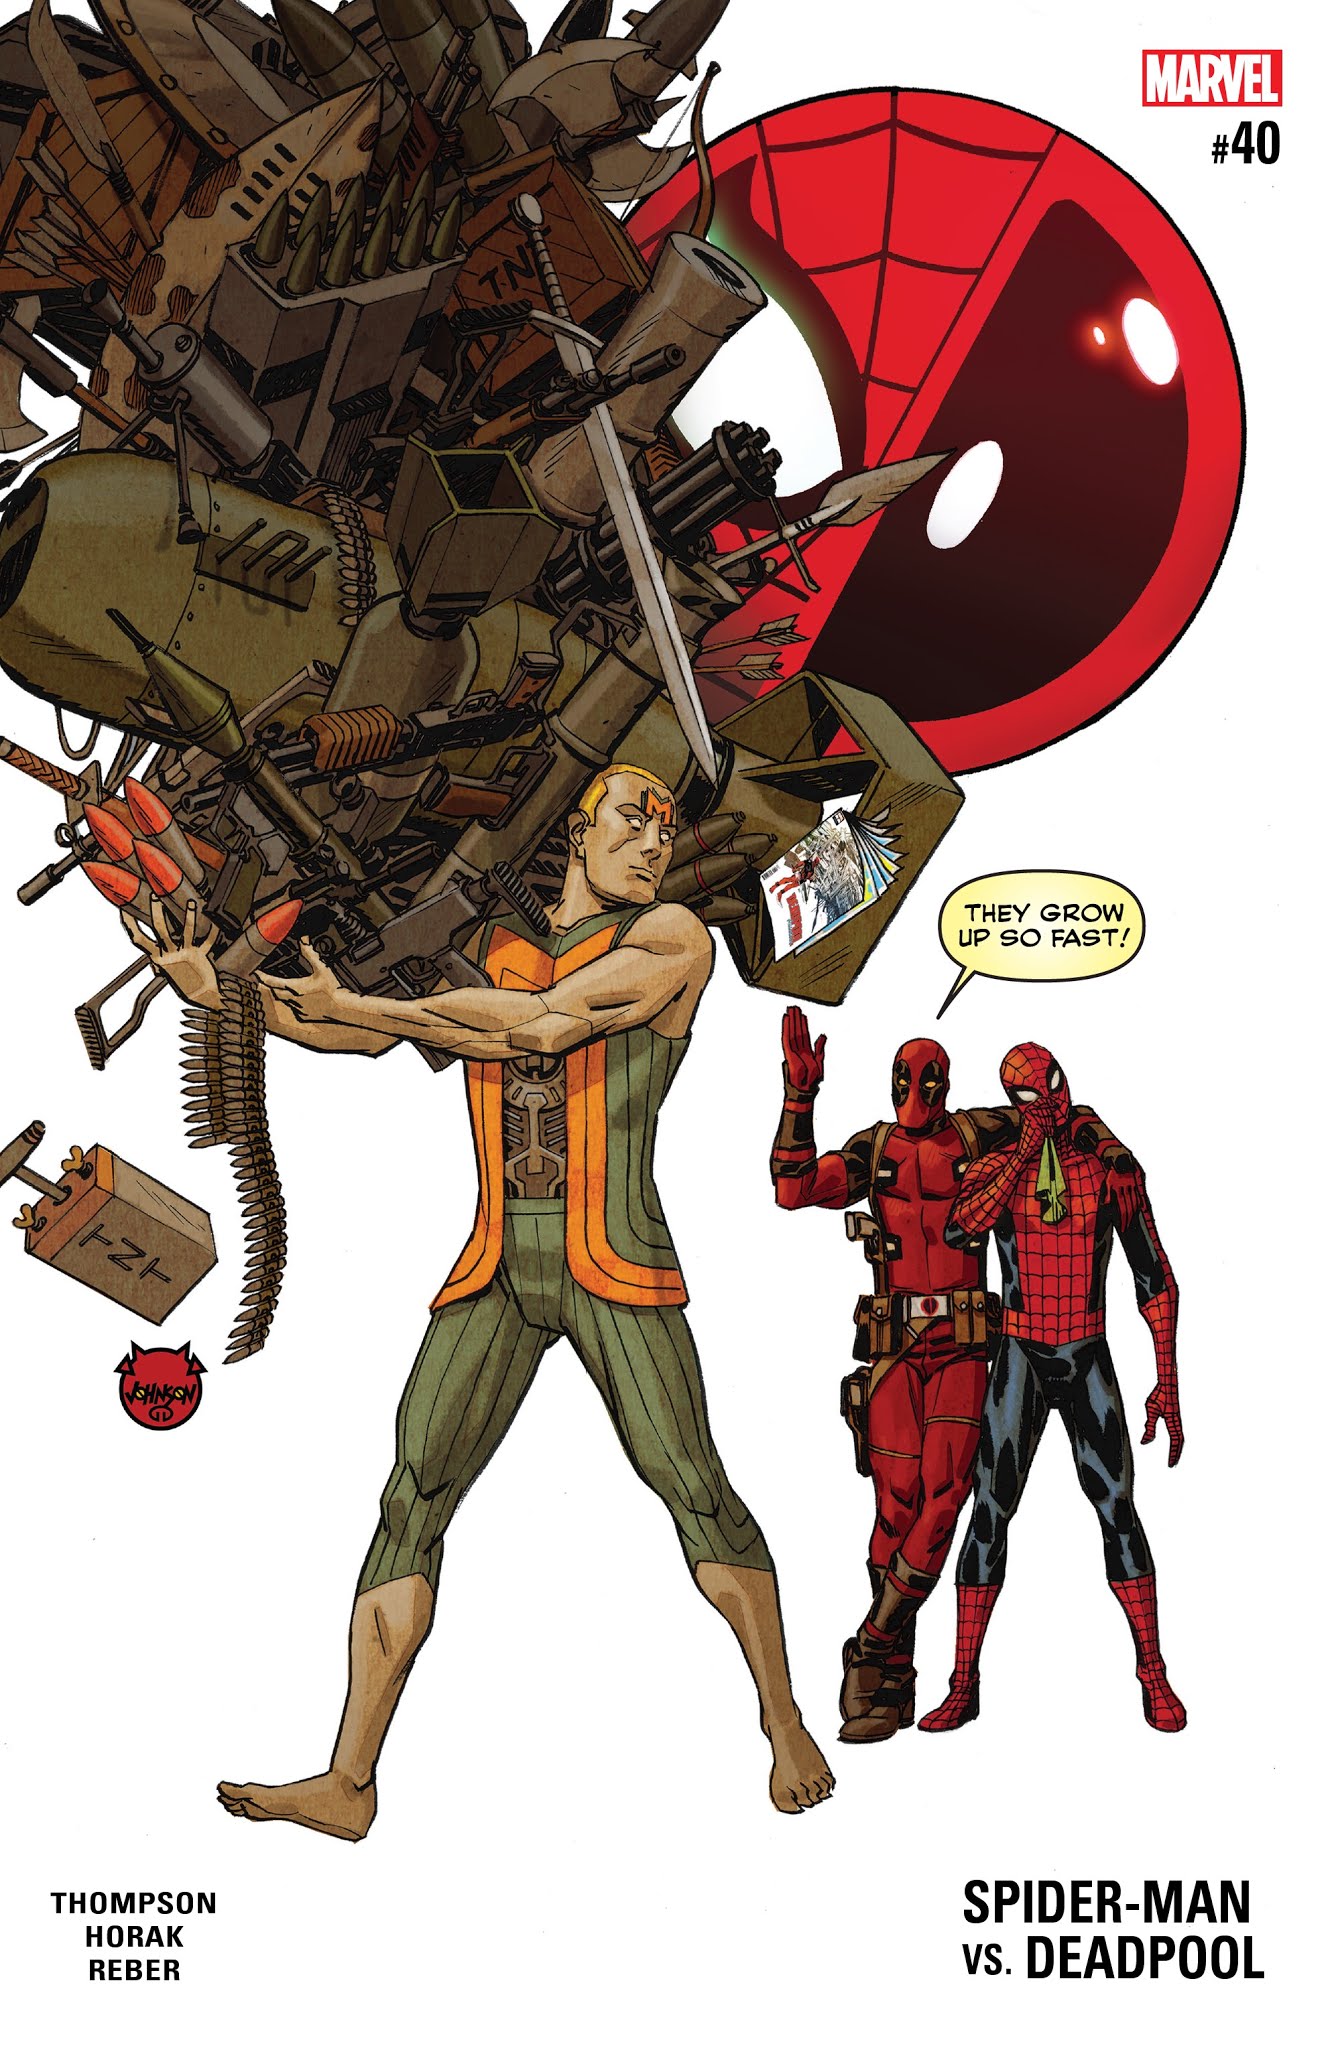 Spider Man Deadpool Issue 40 | Read Spider Man Deadpool Issue 40 comic  online in high quality. Read Full Comic online for free - Read comics online  in high quality .| READ COMIC ONLINE